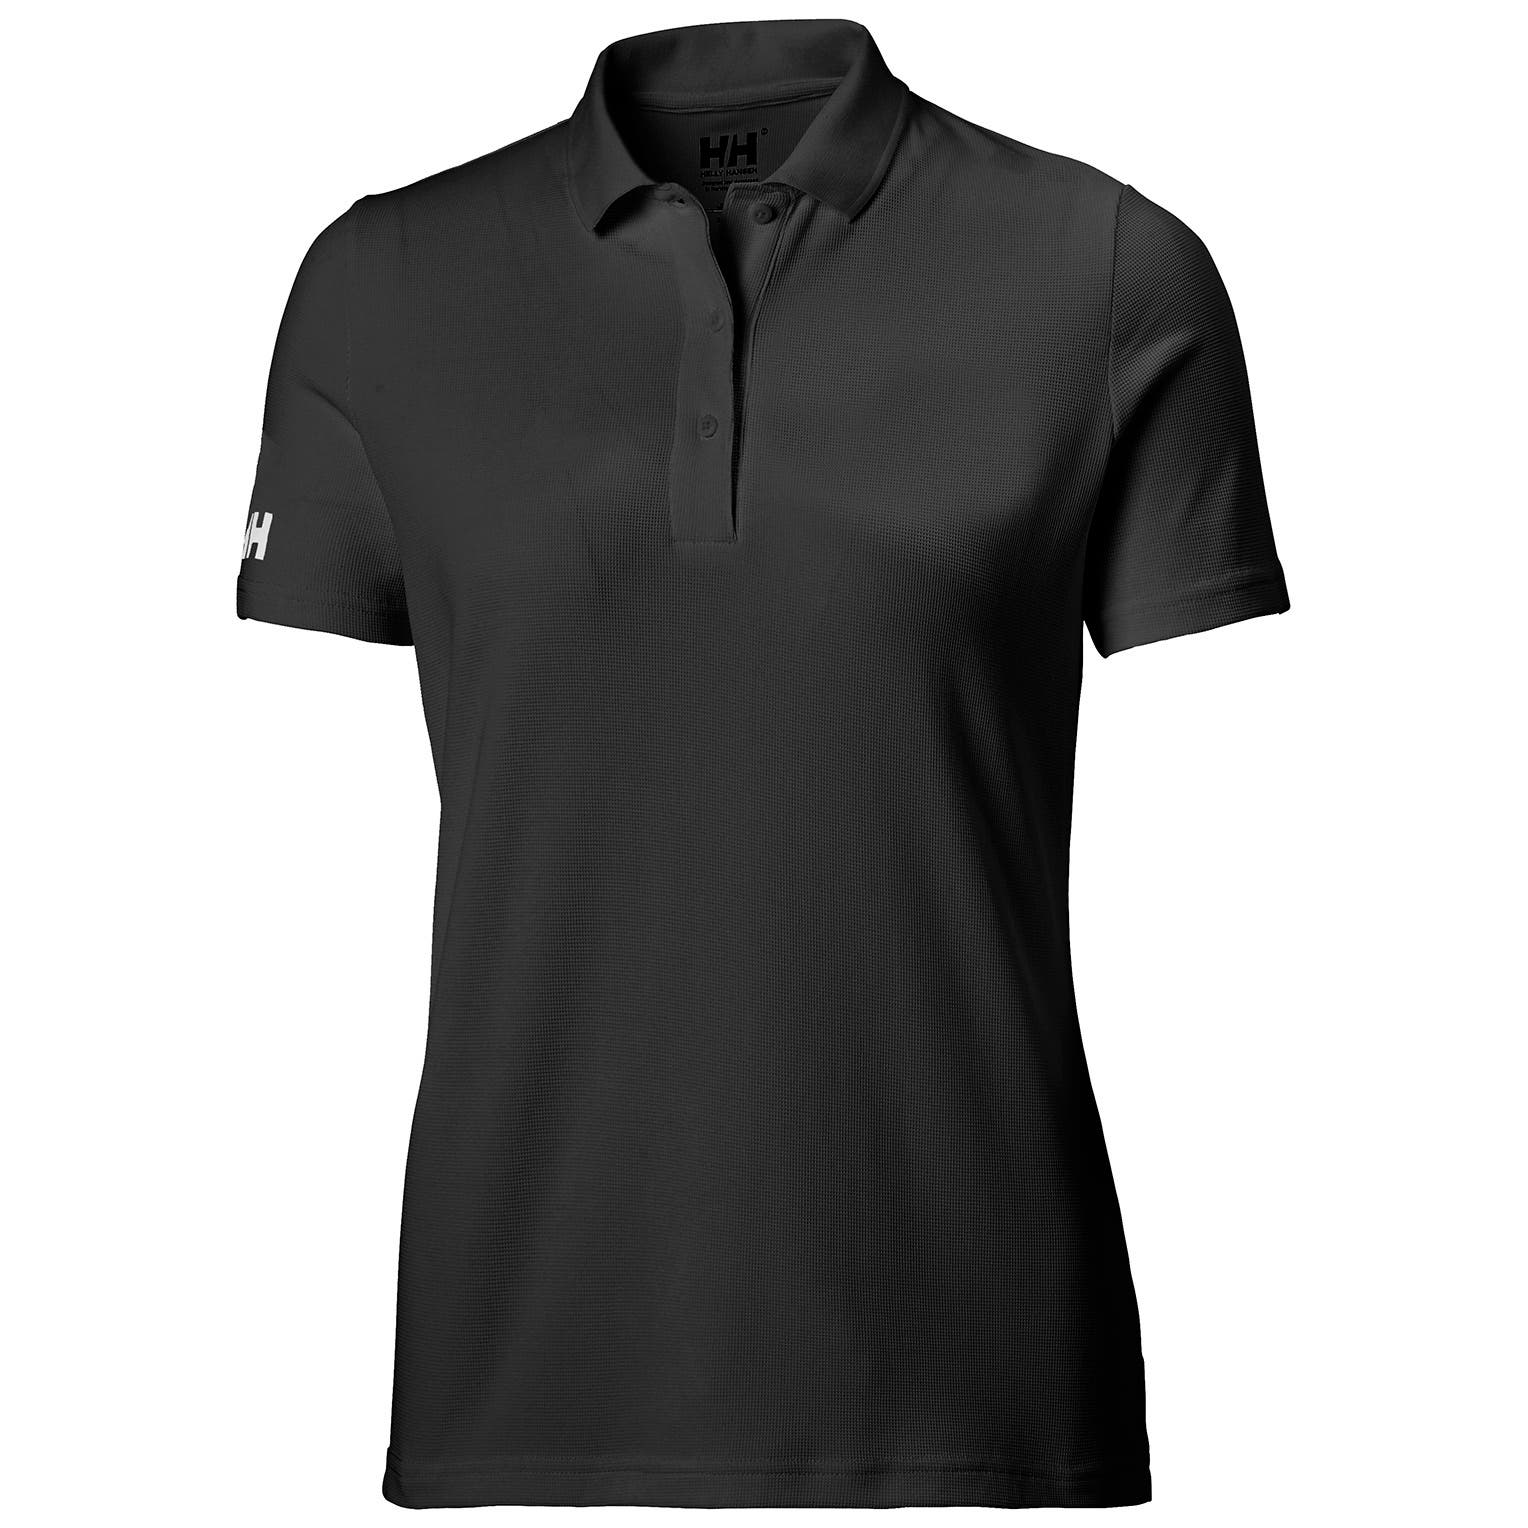 Helly Hansen Women's Tech Crew Polo in Black from the front